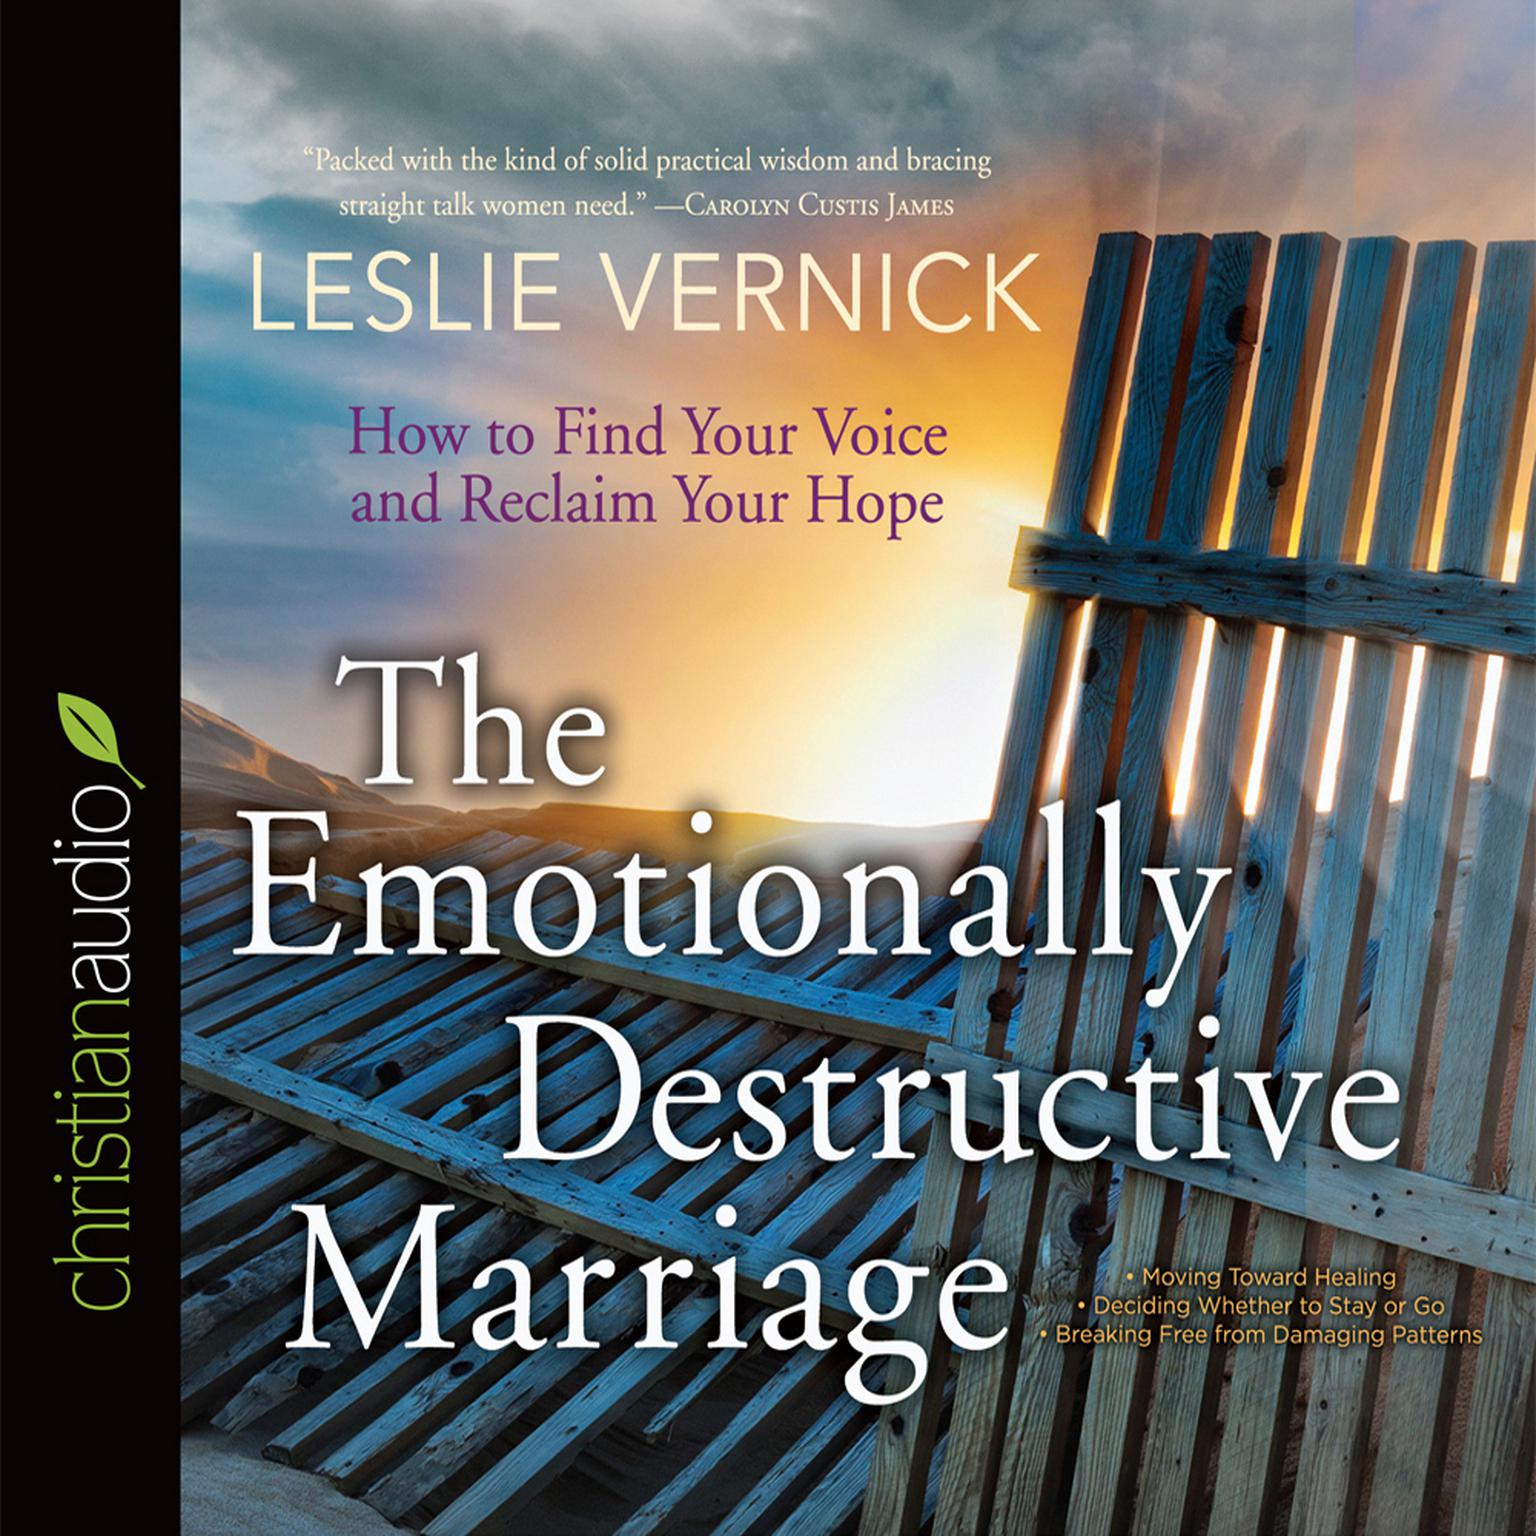 Emotionally Destructive Marriage: How to Find Your Voice and Reclaim Your Hope Audiobook, by Leslie Vernick